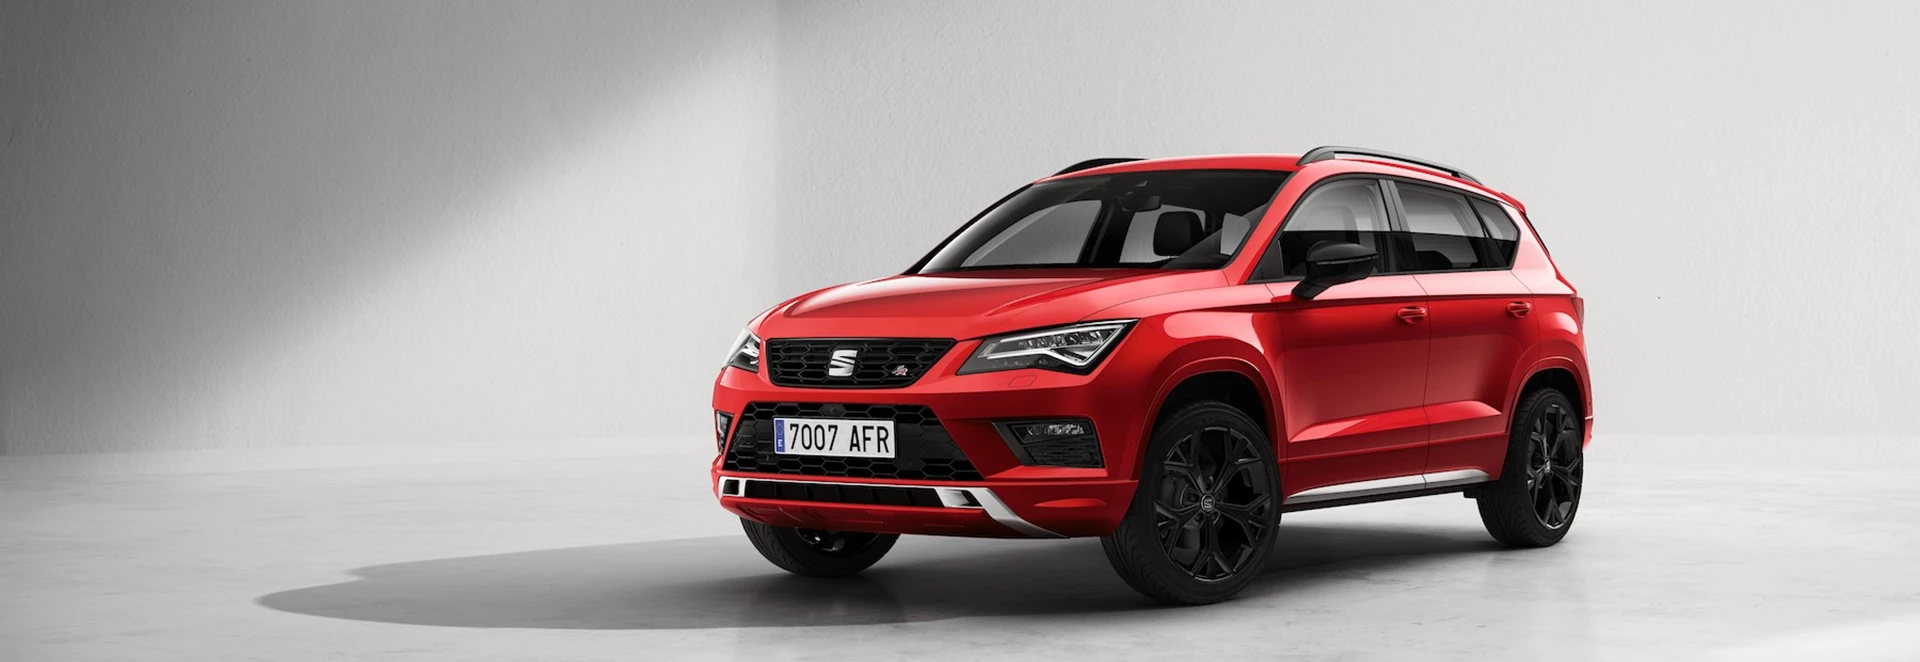 New FR Black Edition for popular SEAT Ateca crossover